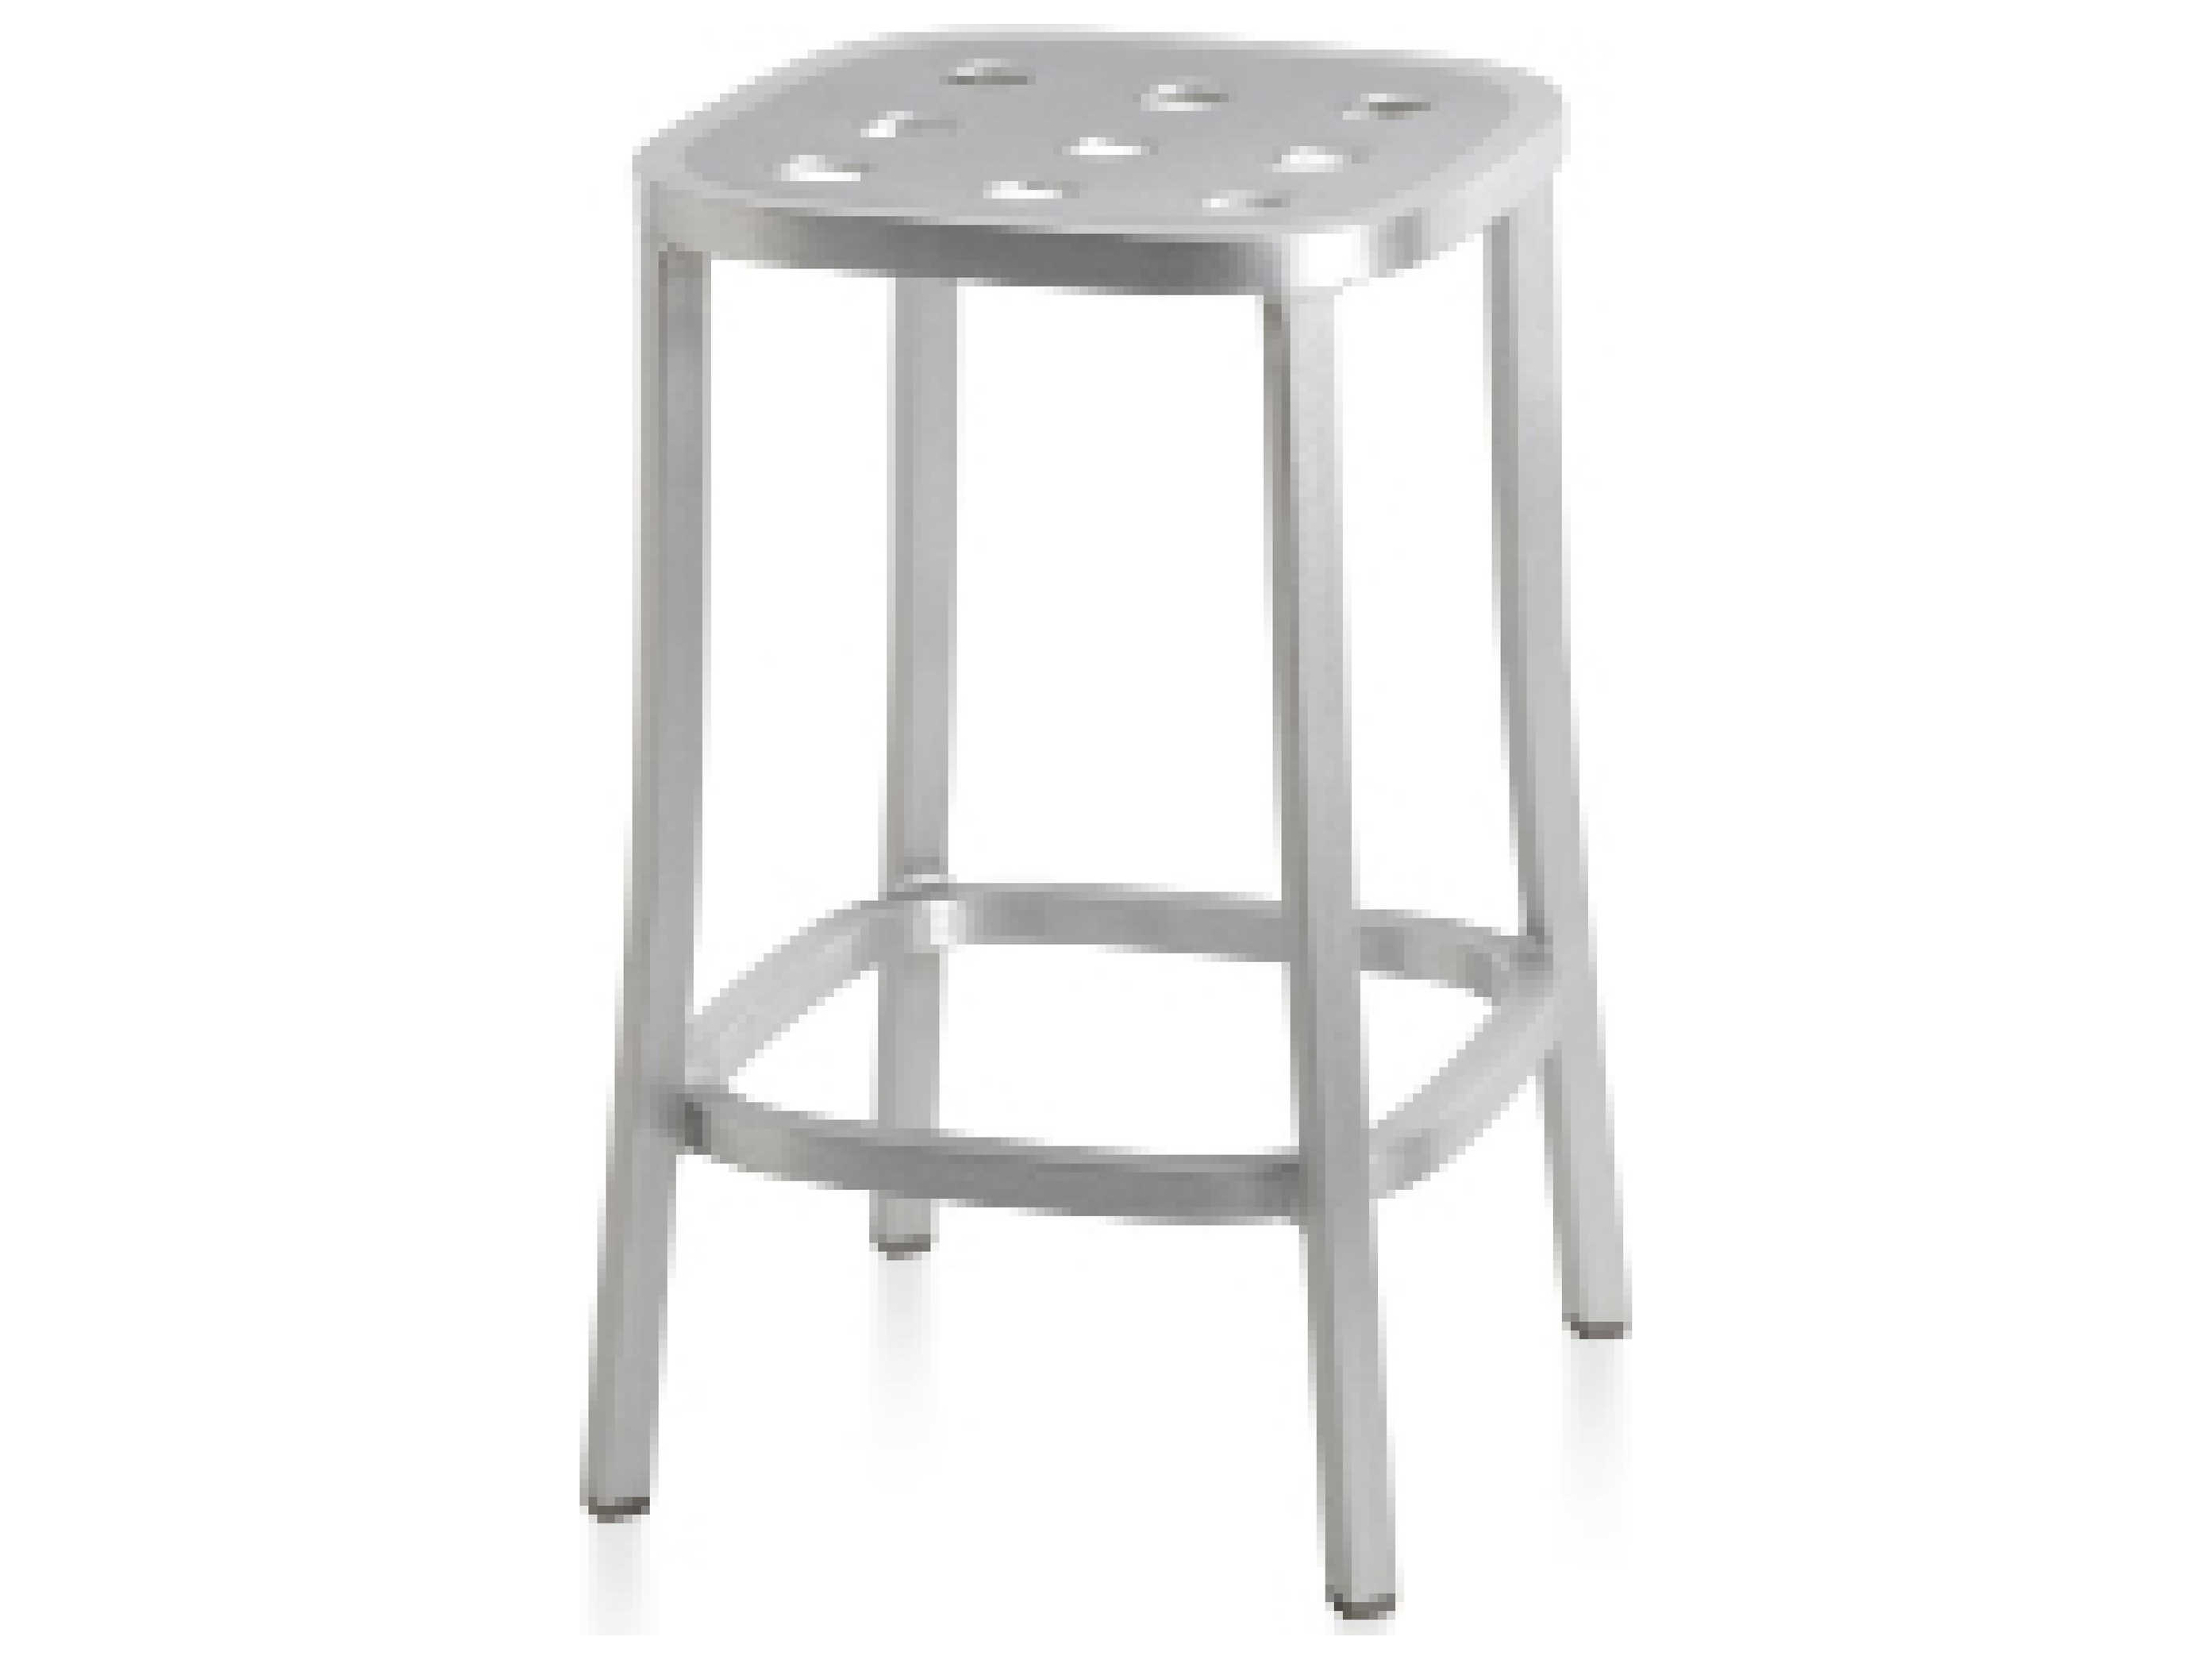 Emeco Outdoor 1 Inch By Jasper Morrison, Counter Stools 24 Inches High